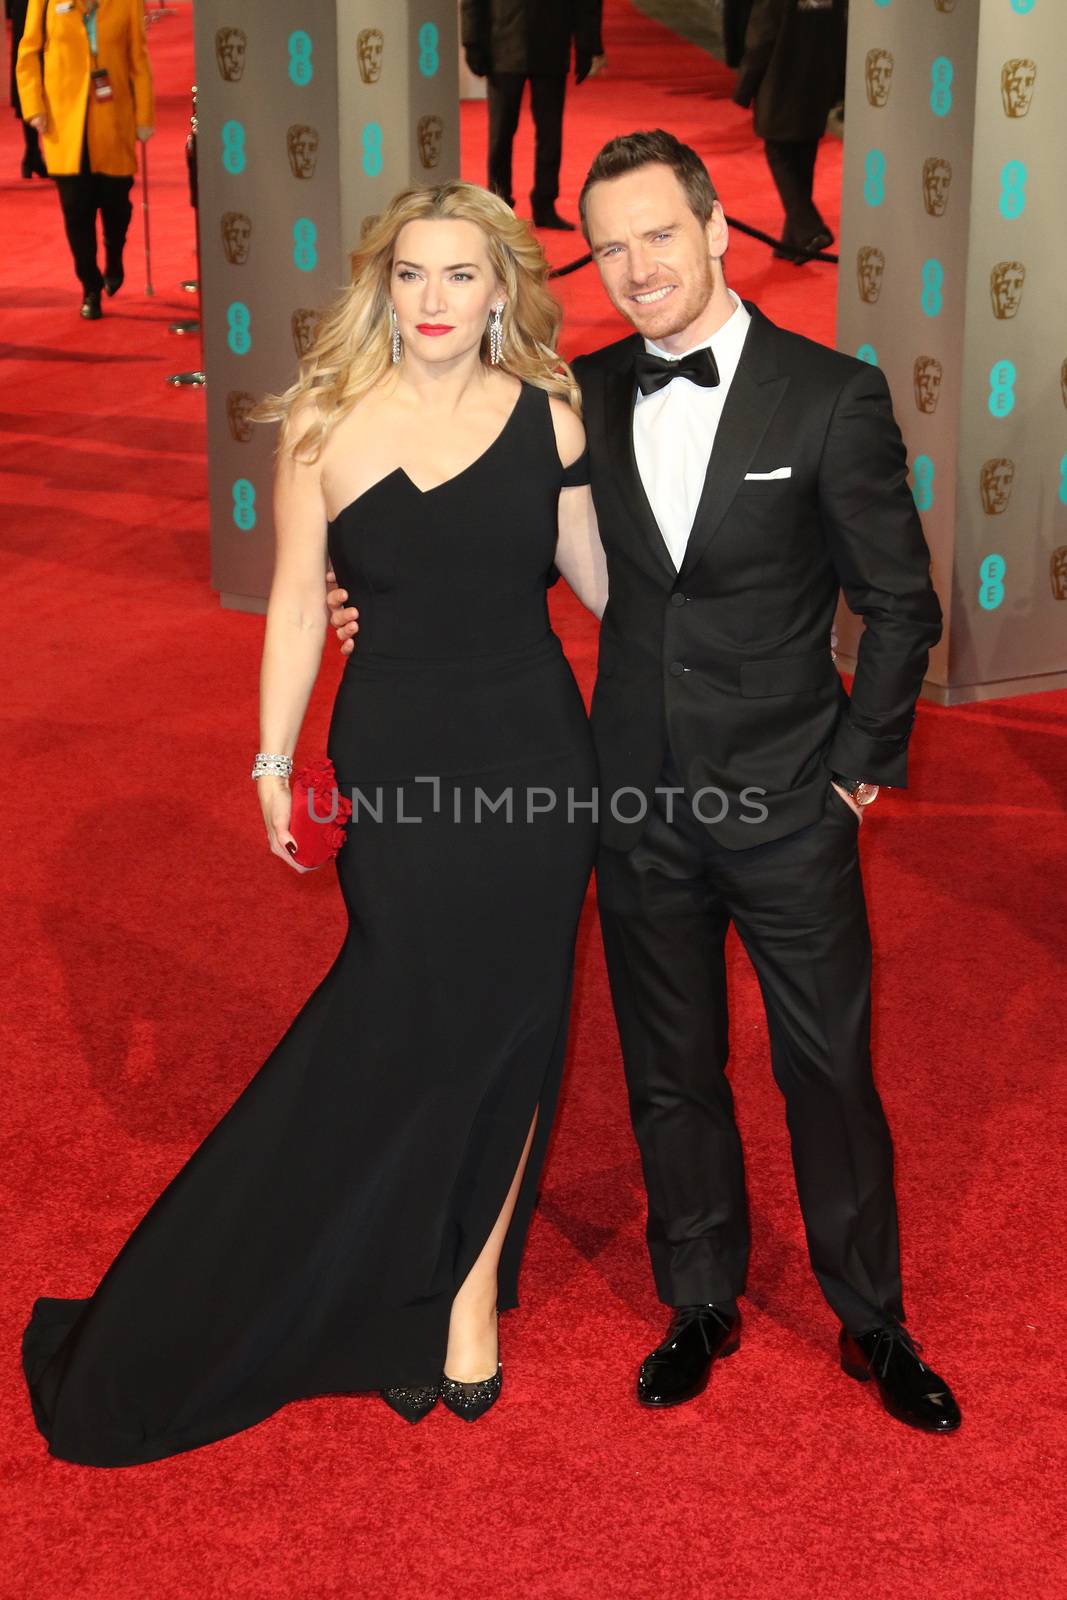 UK, London: British actress Kate Winslet poses with German-Irish actor Michael Fassbender on the red Carpet at the EE British Academy Film Awards, BAFTA Awards, at the Royal Opera House in London, England, on 14 February 2016.